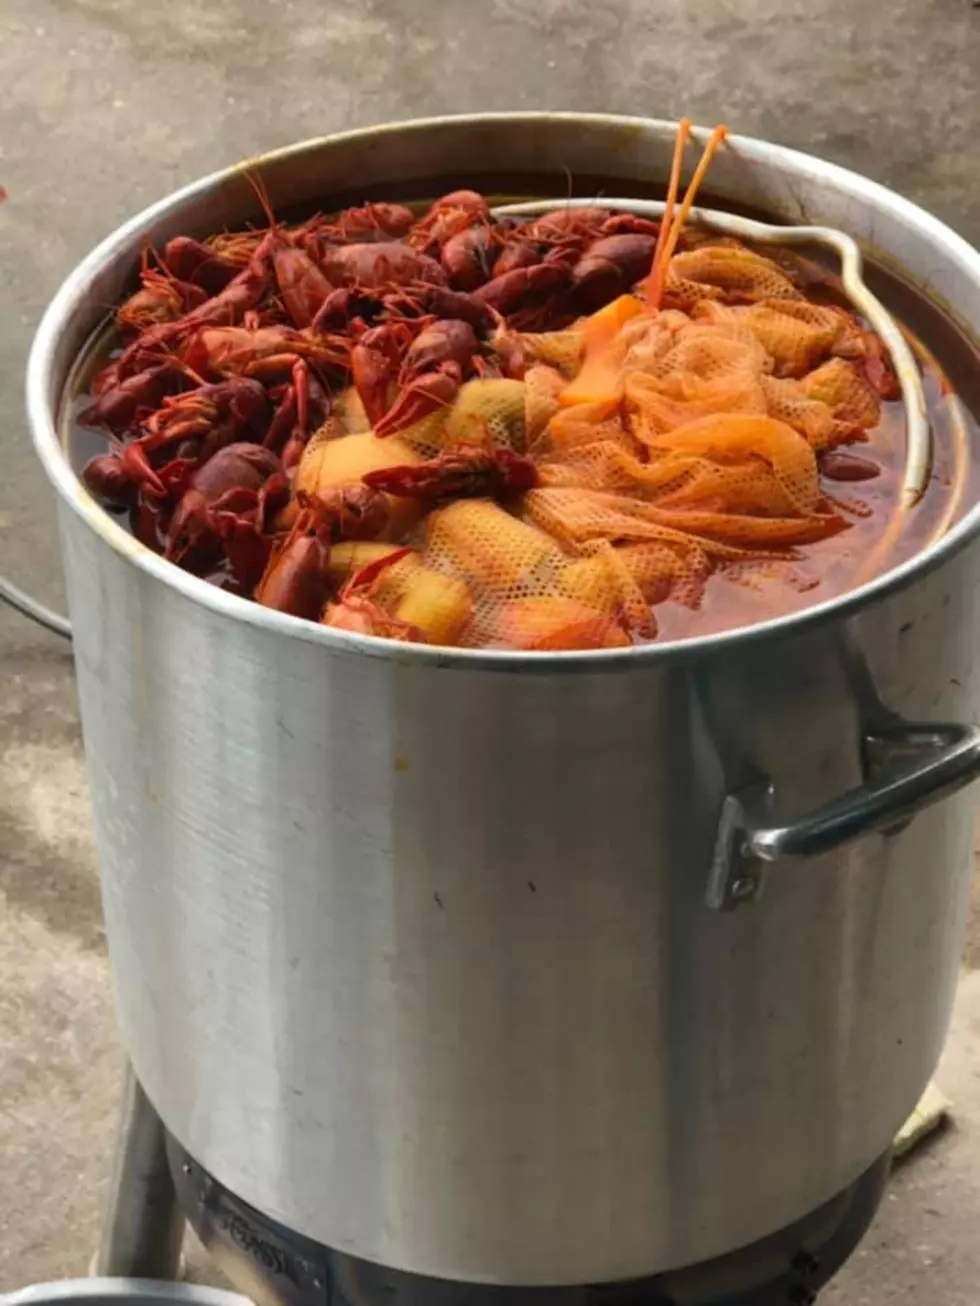 McVey’s Seafood 2nd Annual Crawfish Boil-Off Set For May In Lake Charles